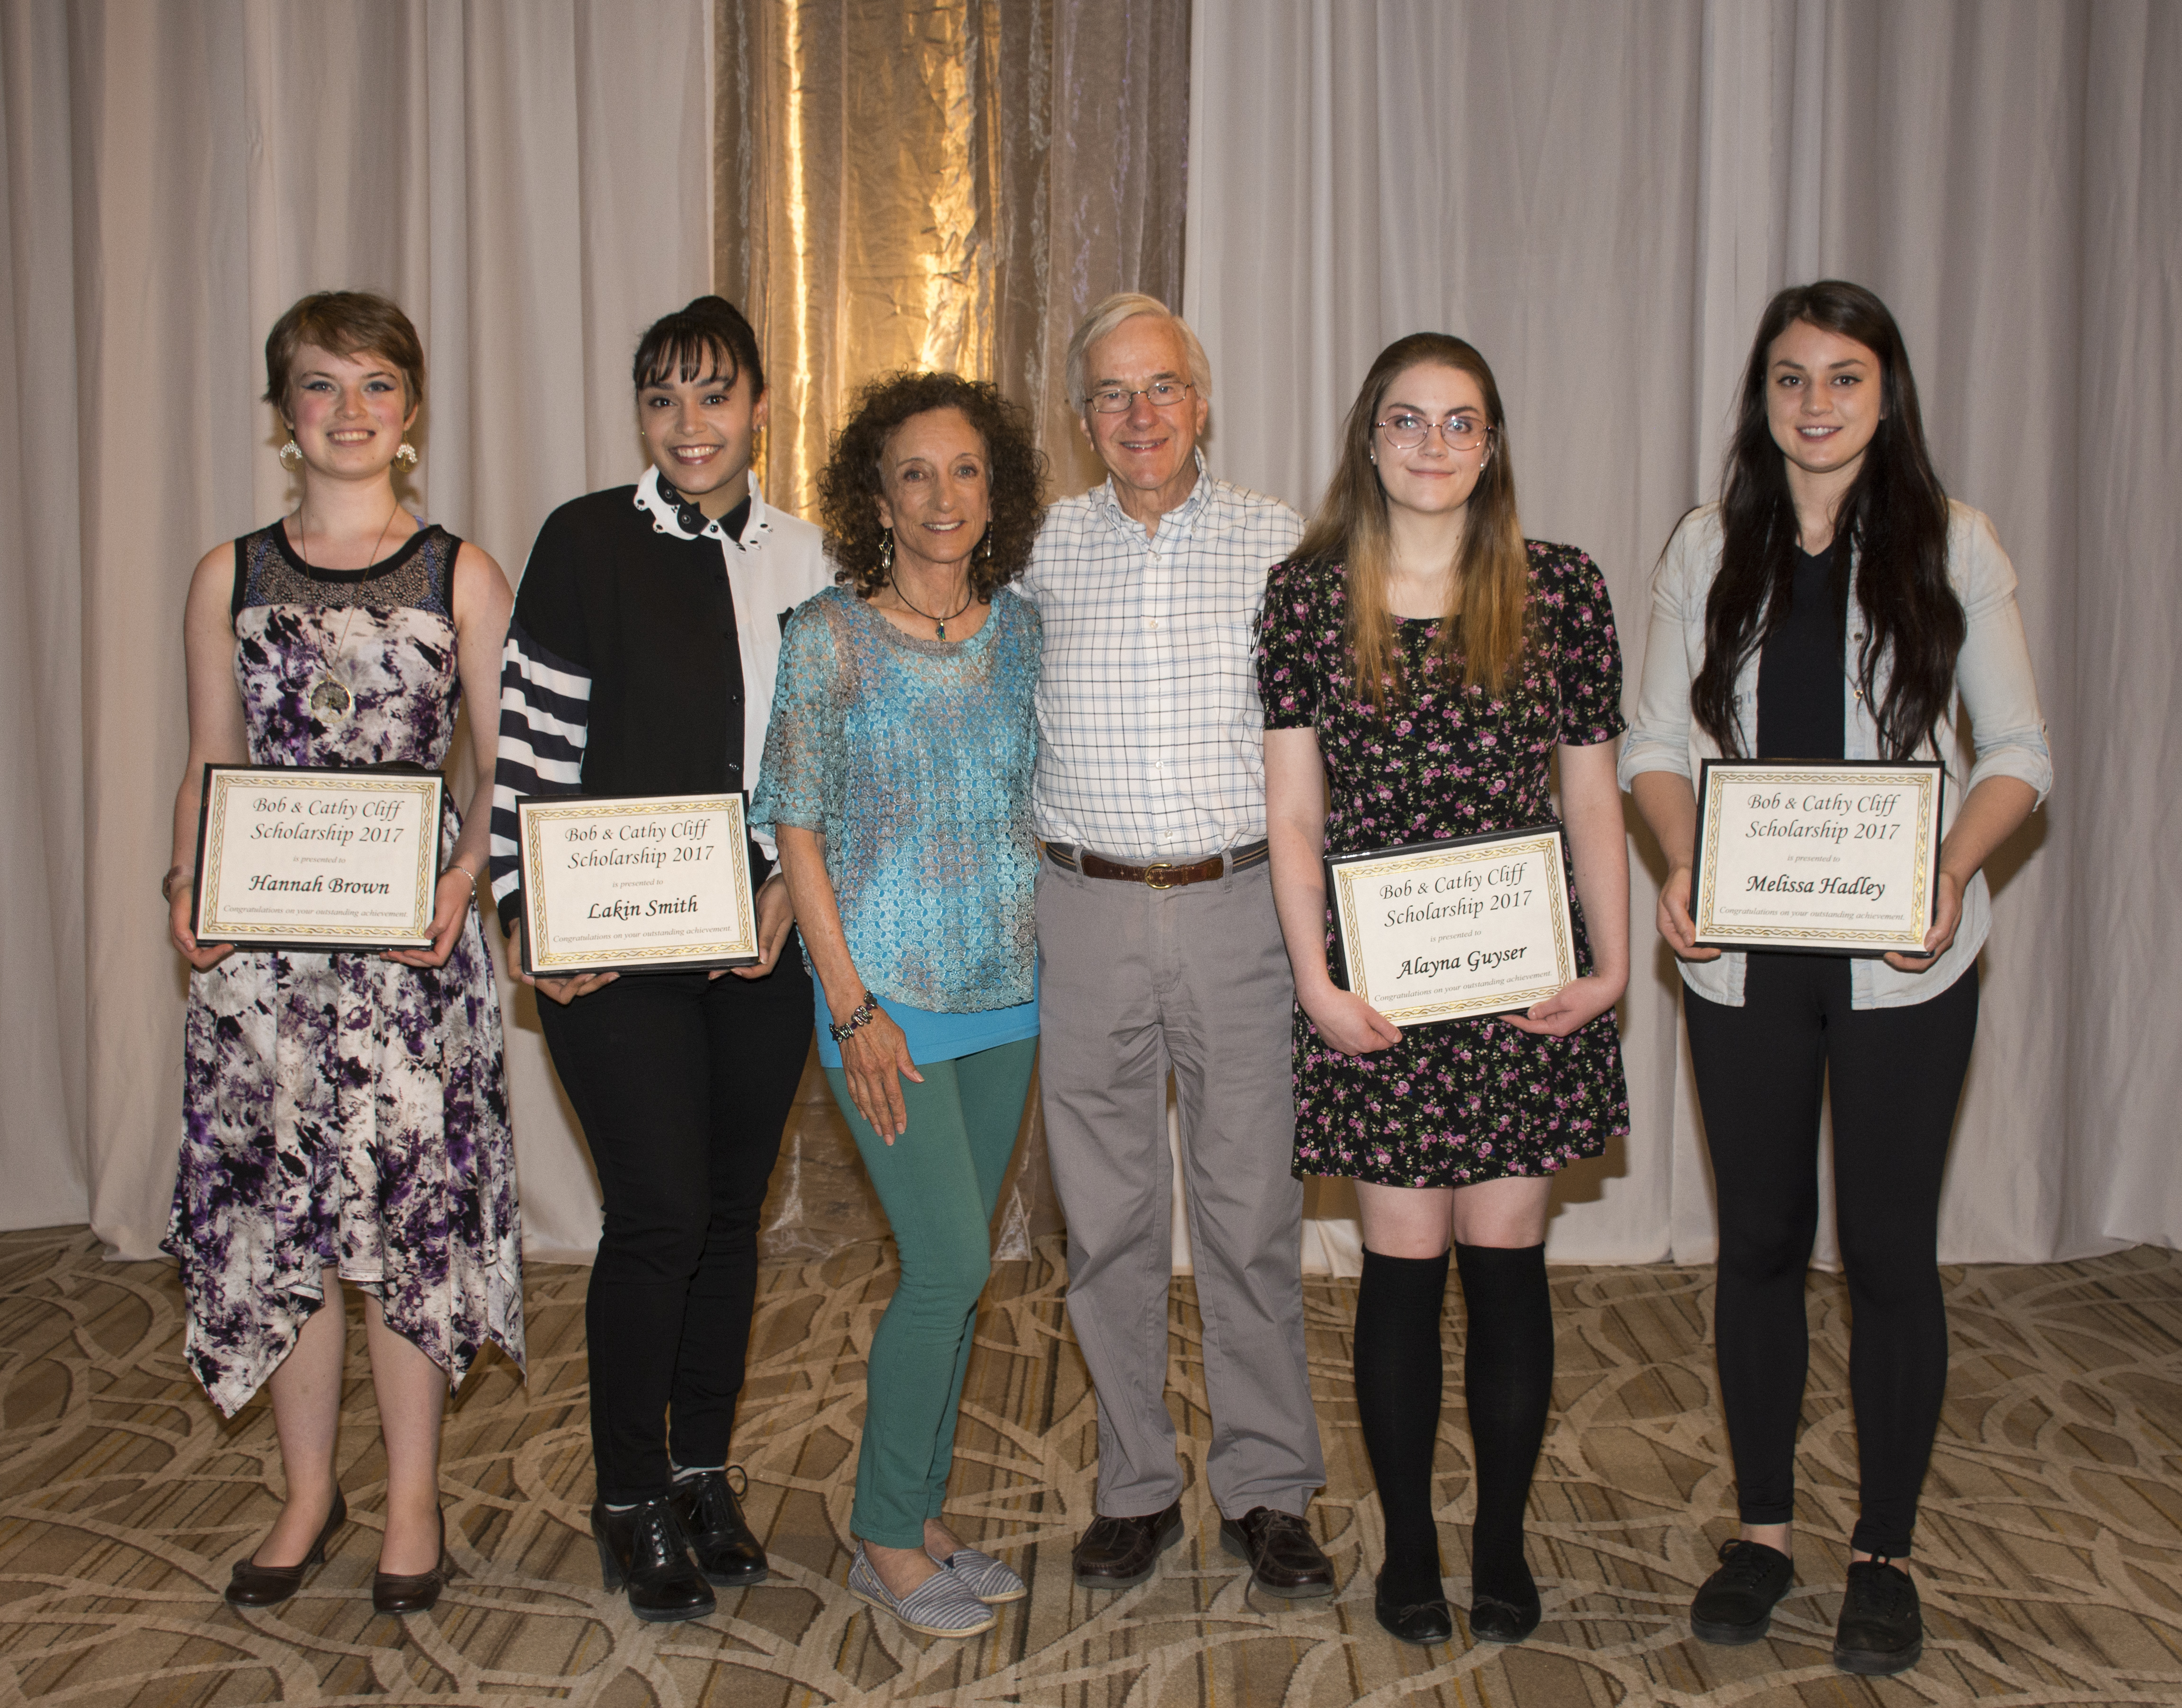 Cathy and Bob Cliff surrounded by Cliff Family scholarship winners from 2017